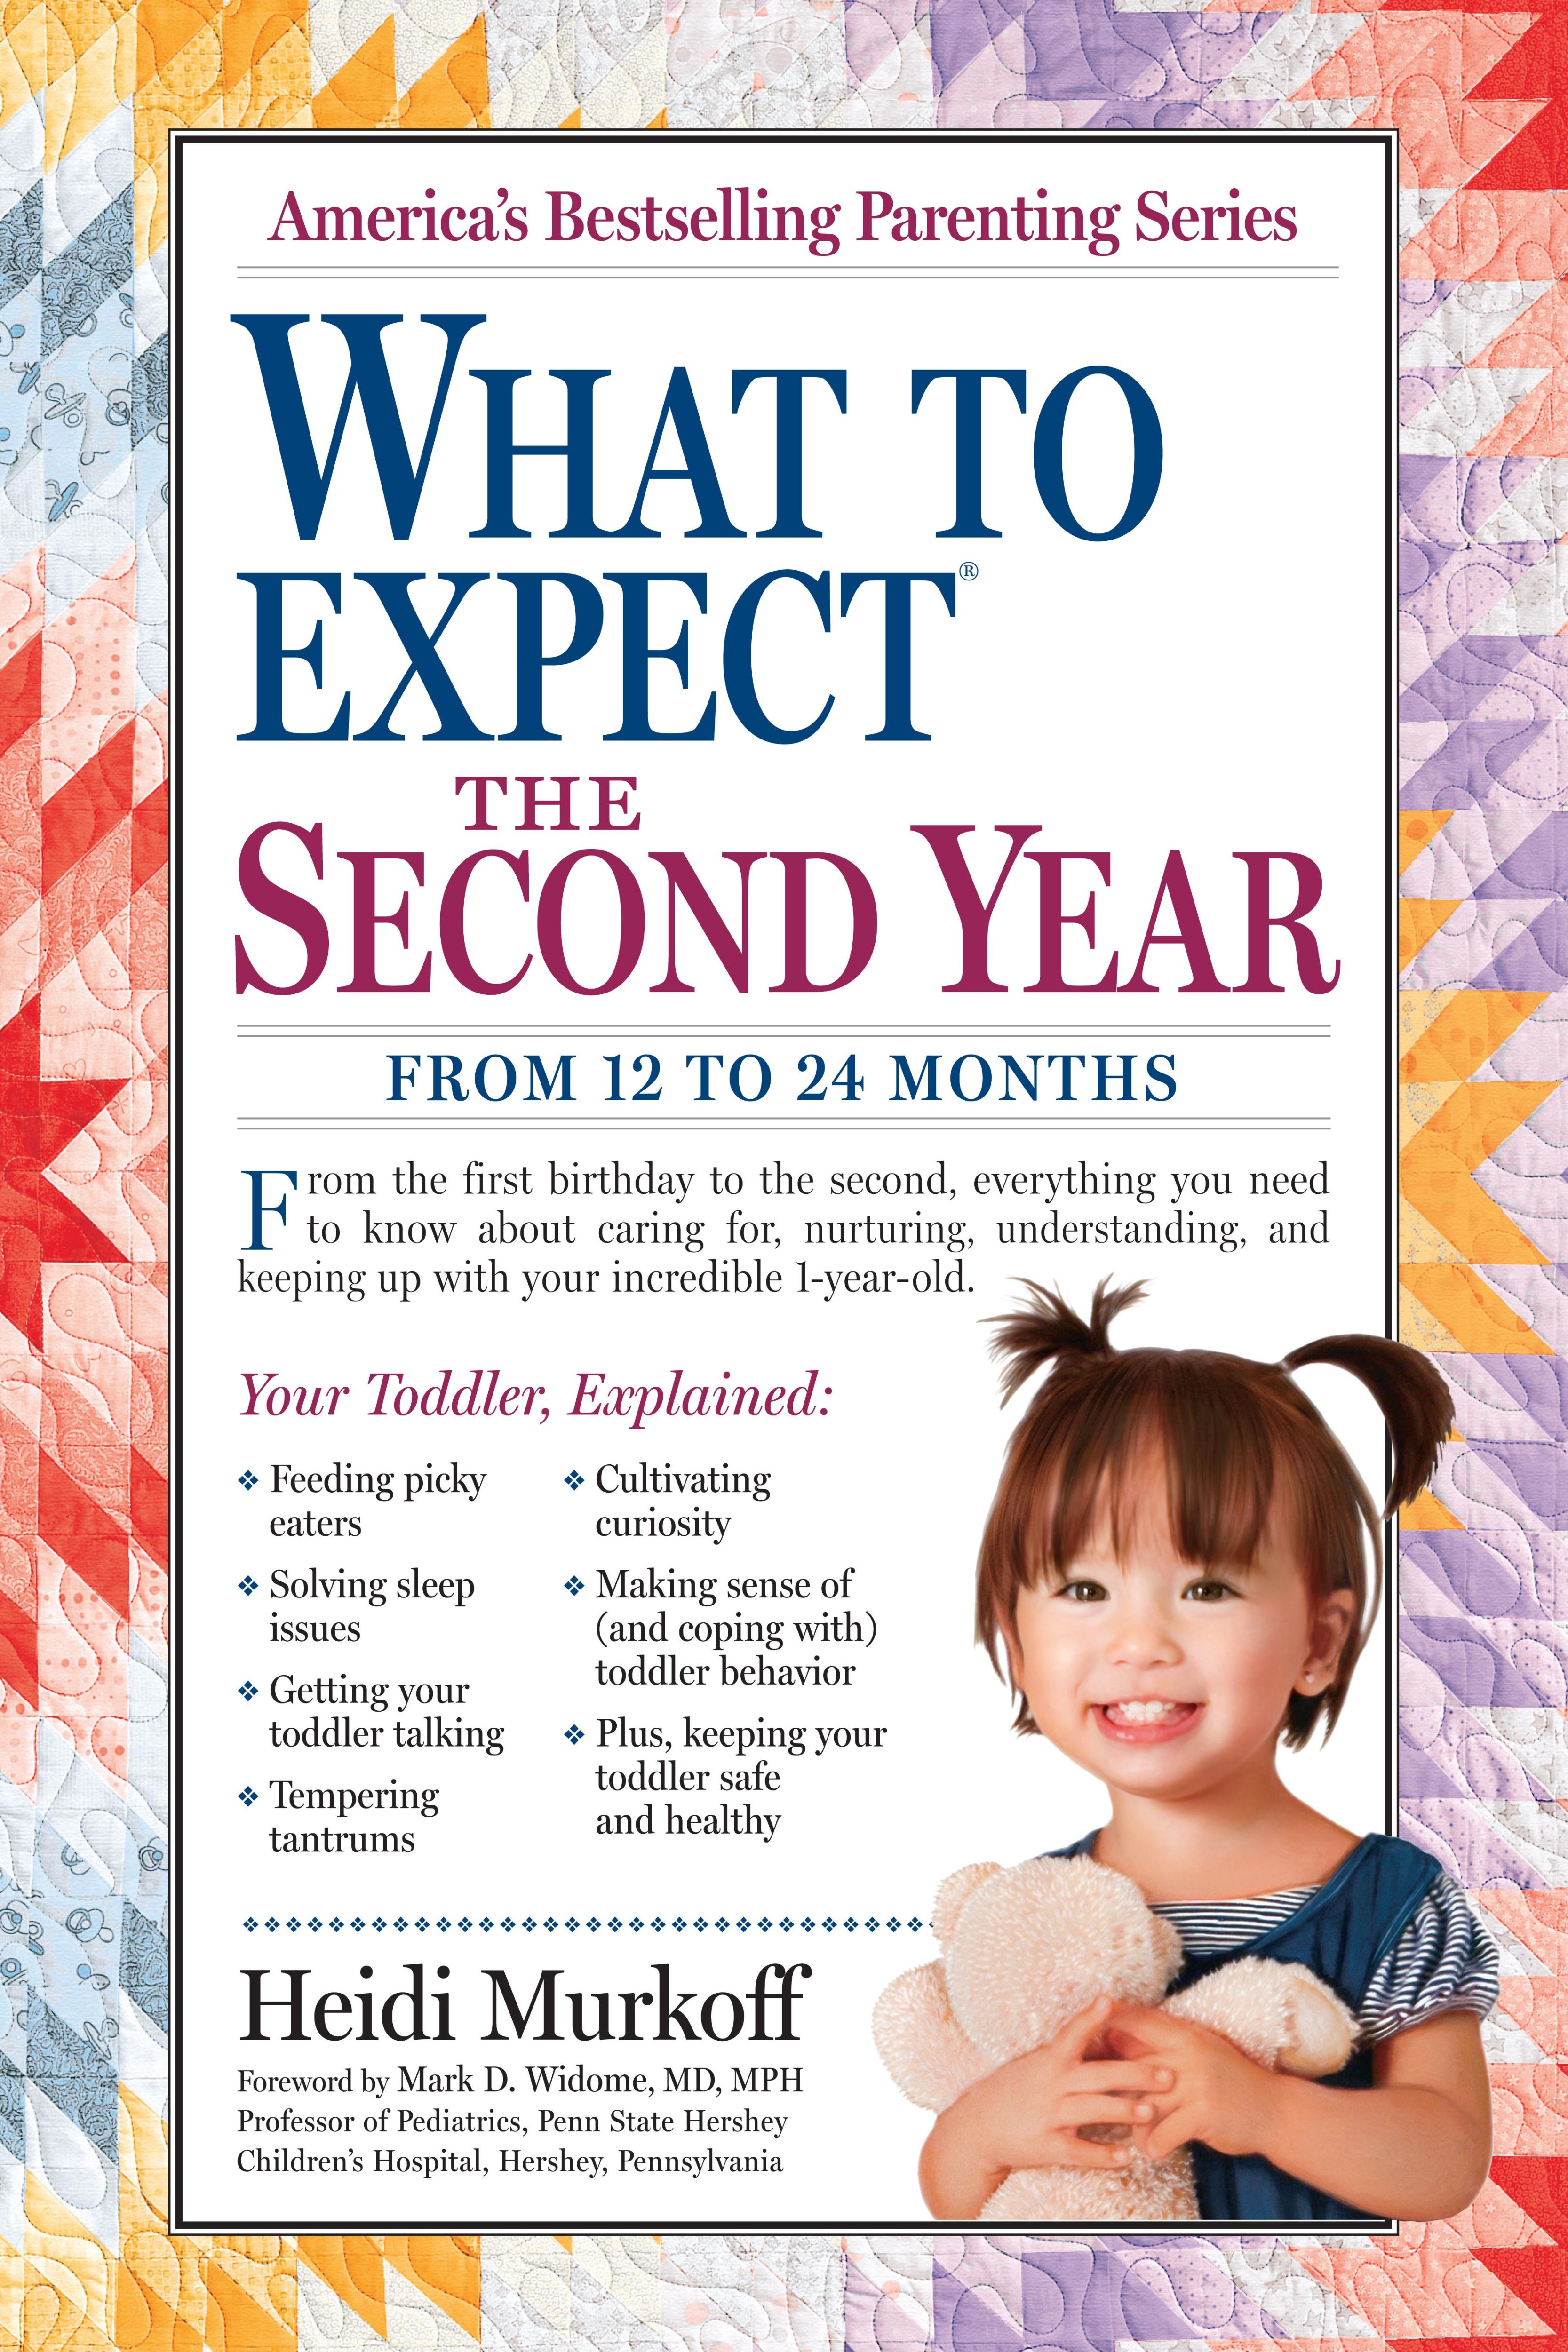 What to Expect: The Second Year / For the 13th to 24th Month / Heidi Murkoff (u. a.) / Taschenbuch / Kartoniert / Broschiert / Englisch / 2011 / Workman Publishing / EAN 9780761152774 - Murkoff, Heidi